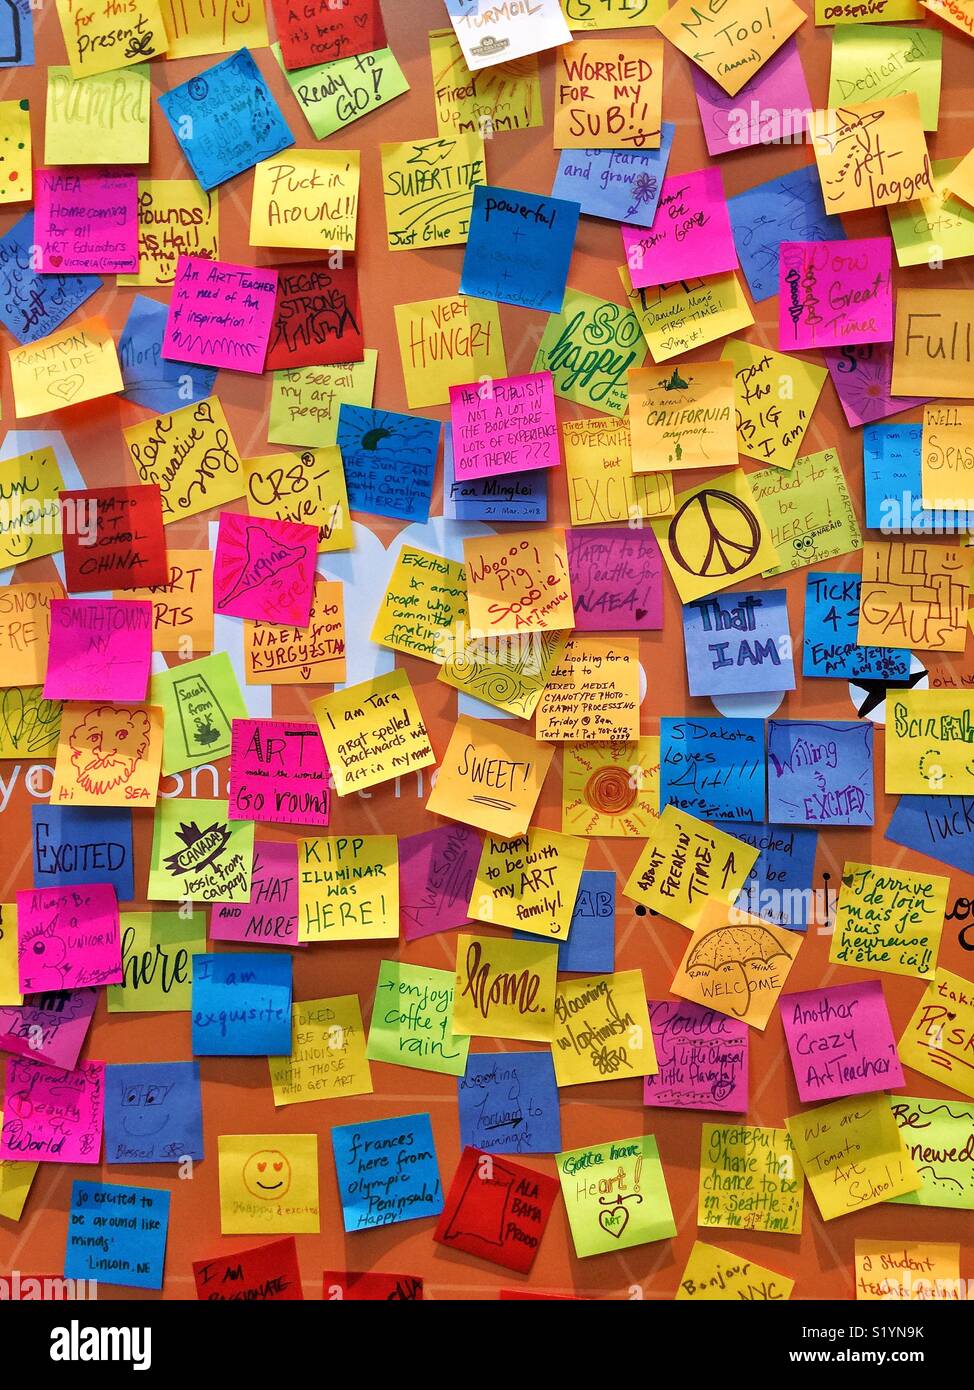 Wall with colorful sticky notes Stock Photo